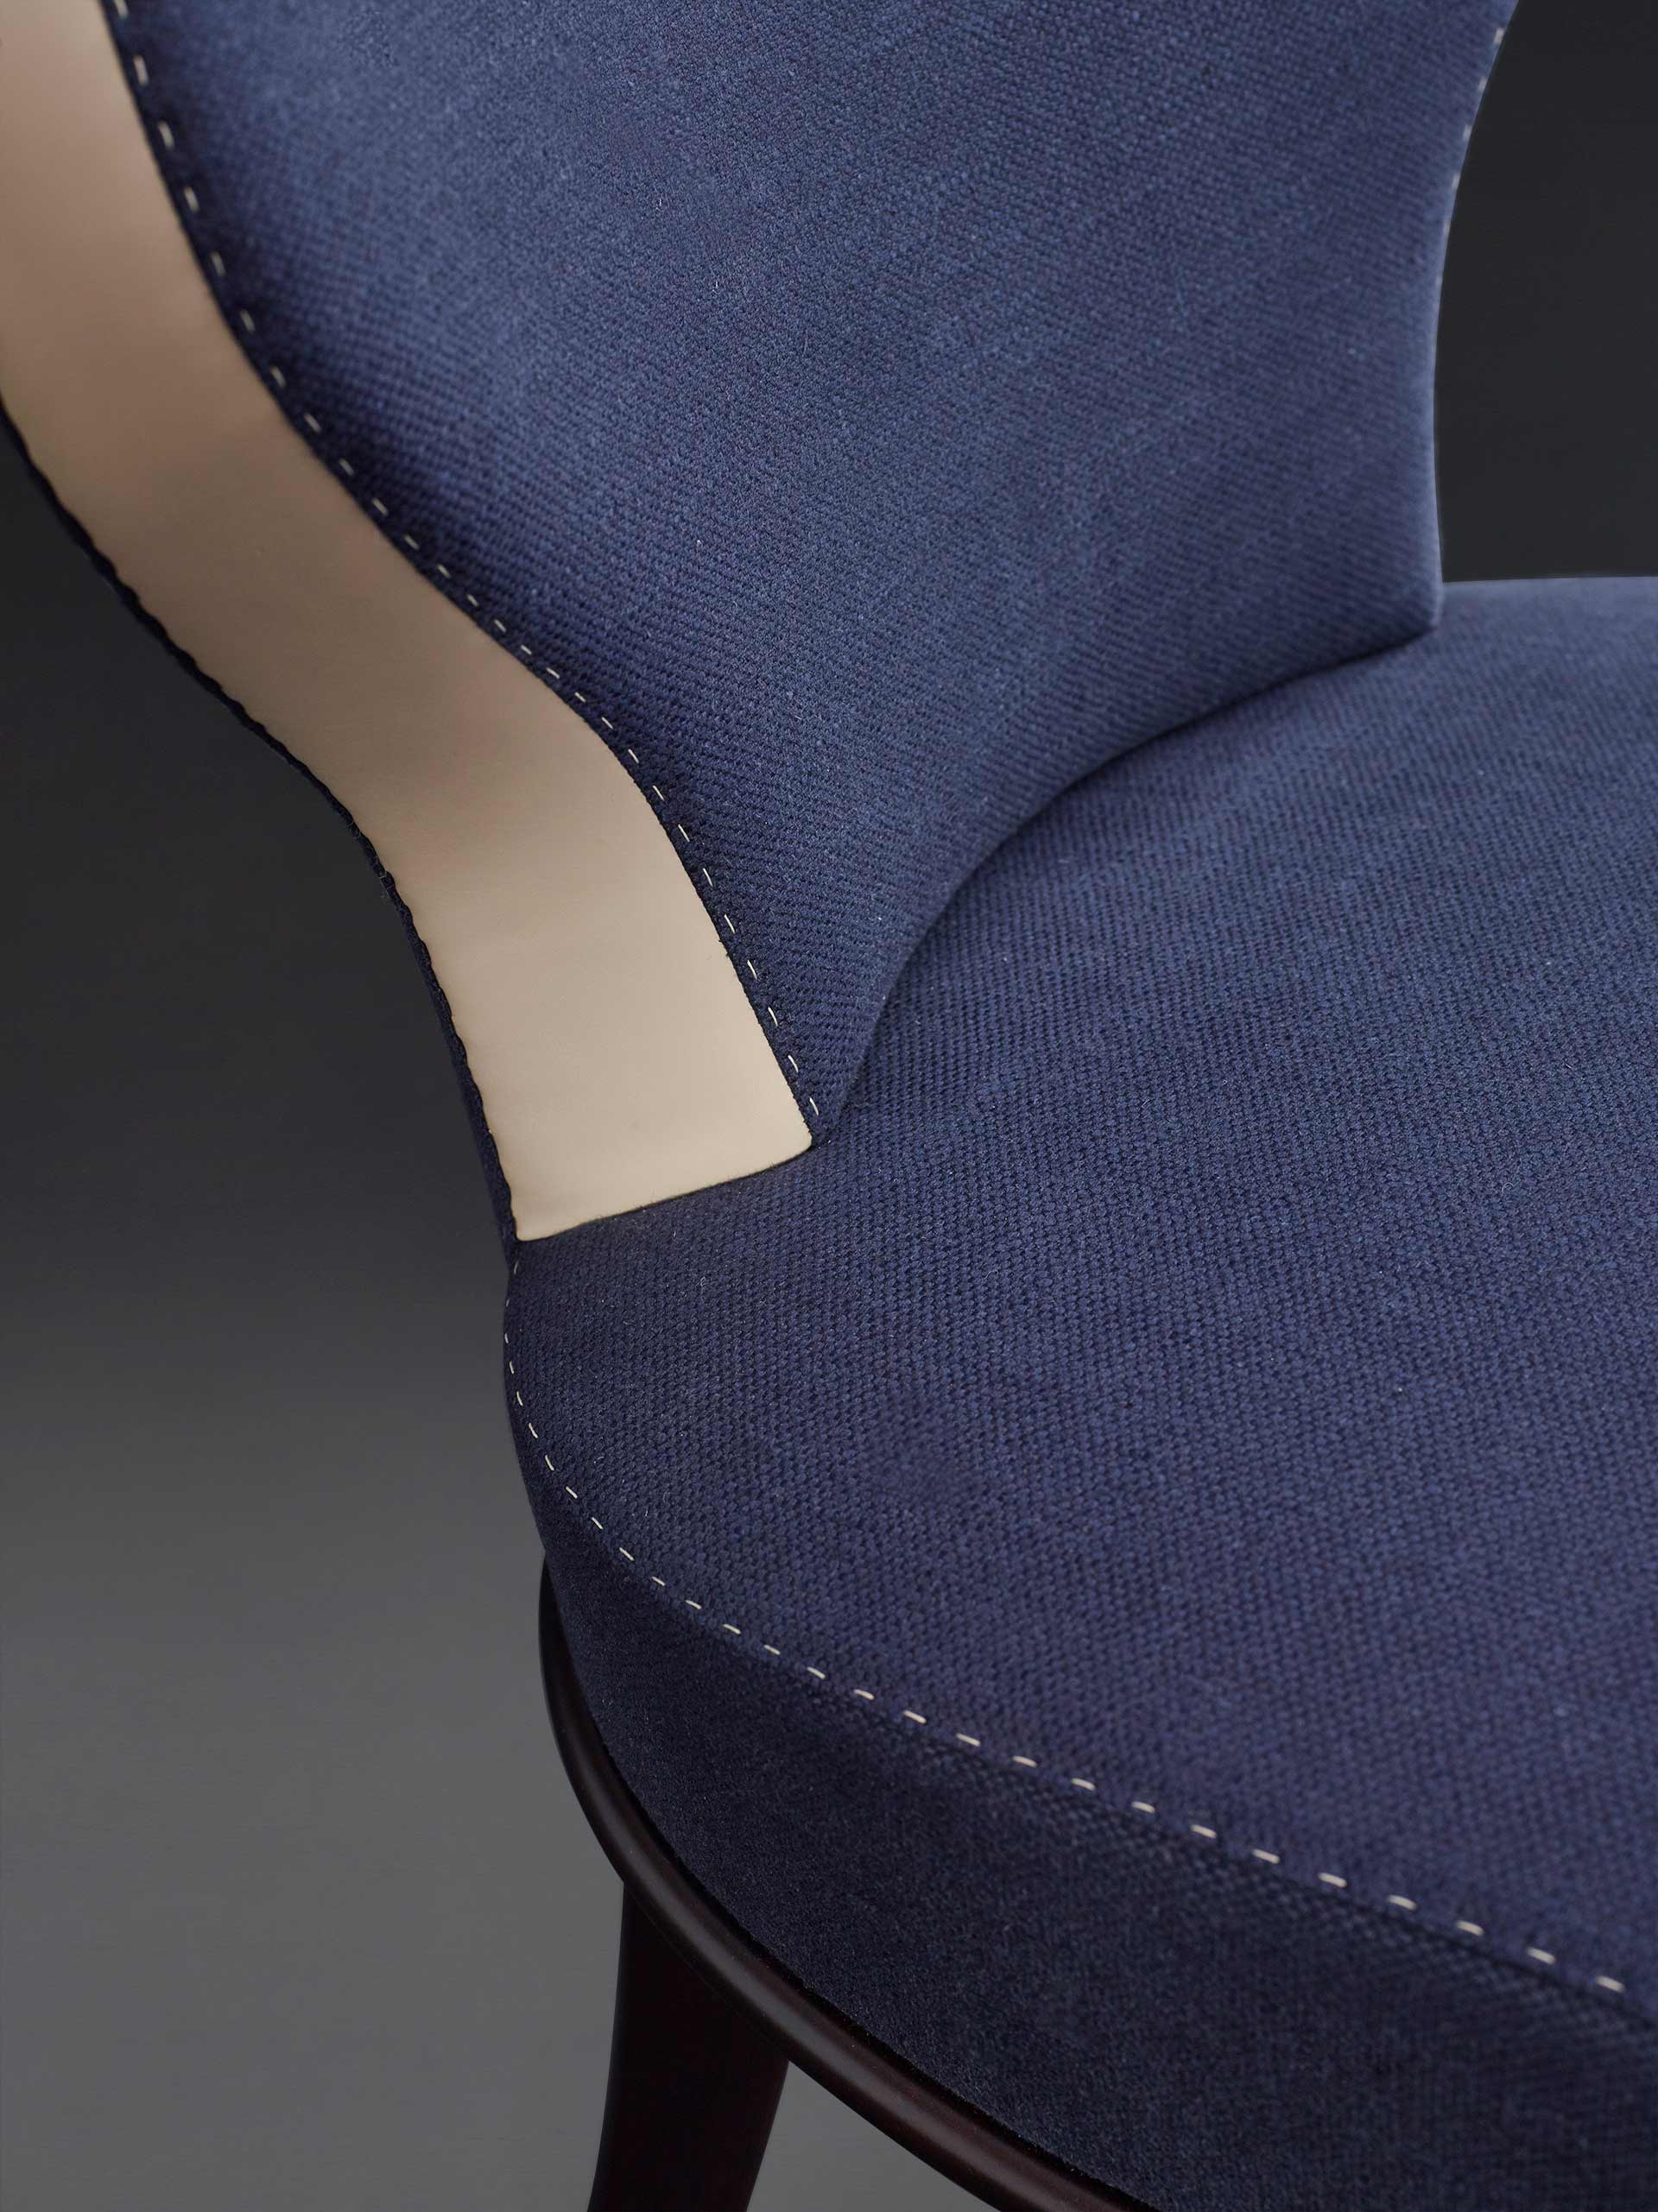 Detail of Moka, wooden chair covered in fabric and leather, with or without bronze armrests, from Promemoria's catalogue | Promemoria